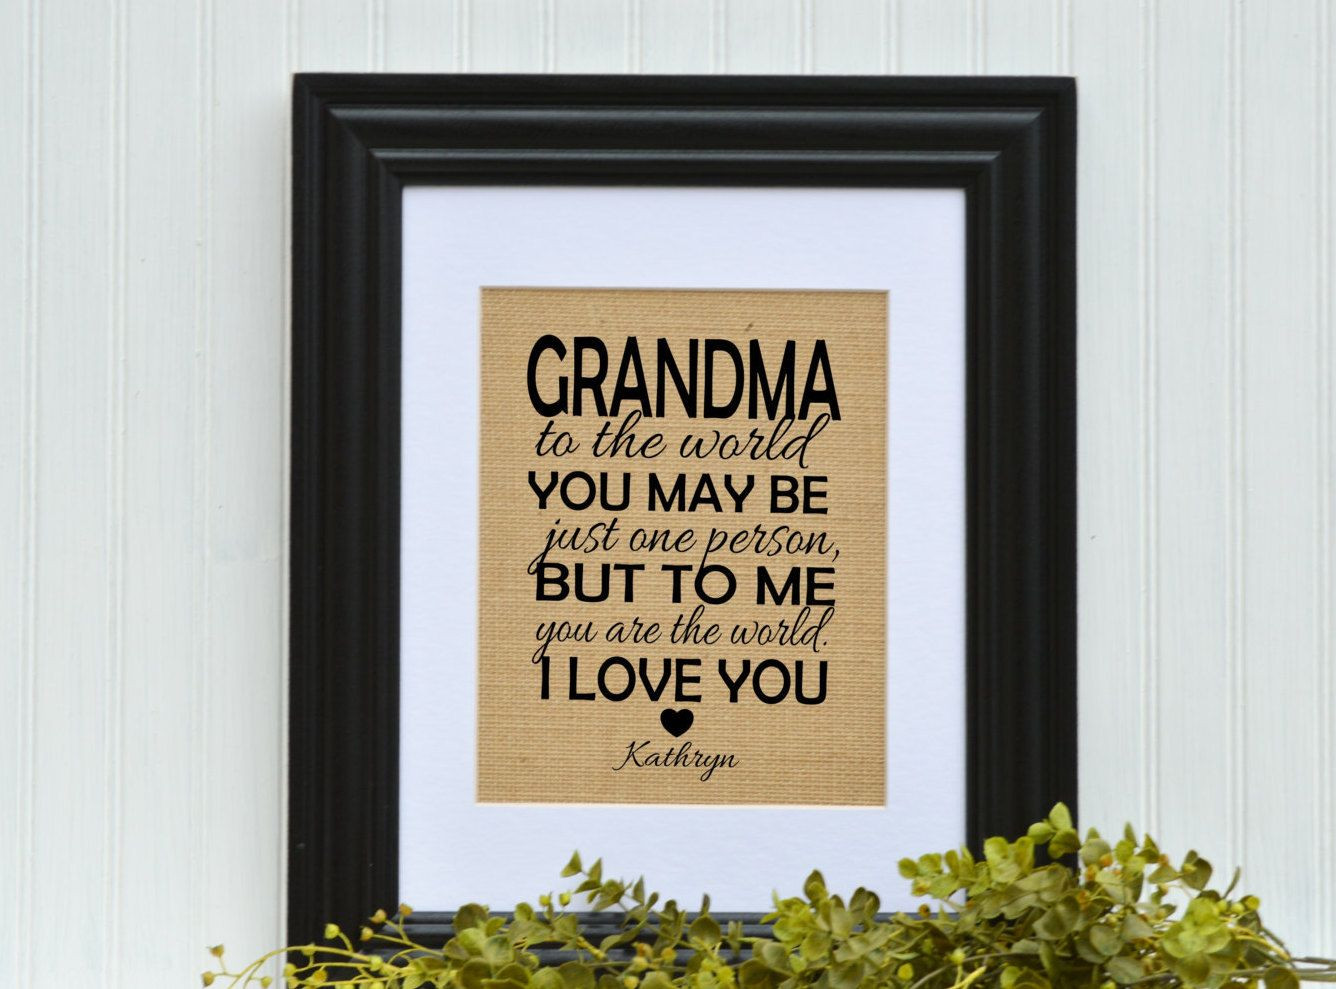 Grandmother Gift Ideas
 FRAMED Burlap Gift Grandmother Gift Unique Gift Idea